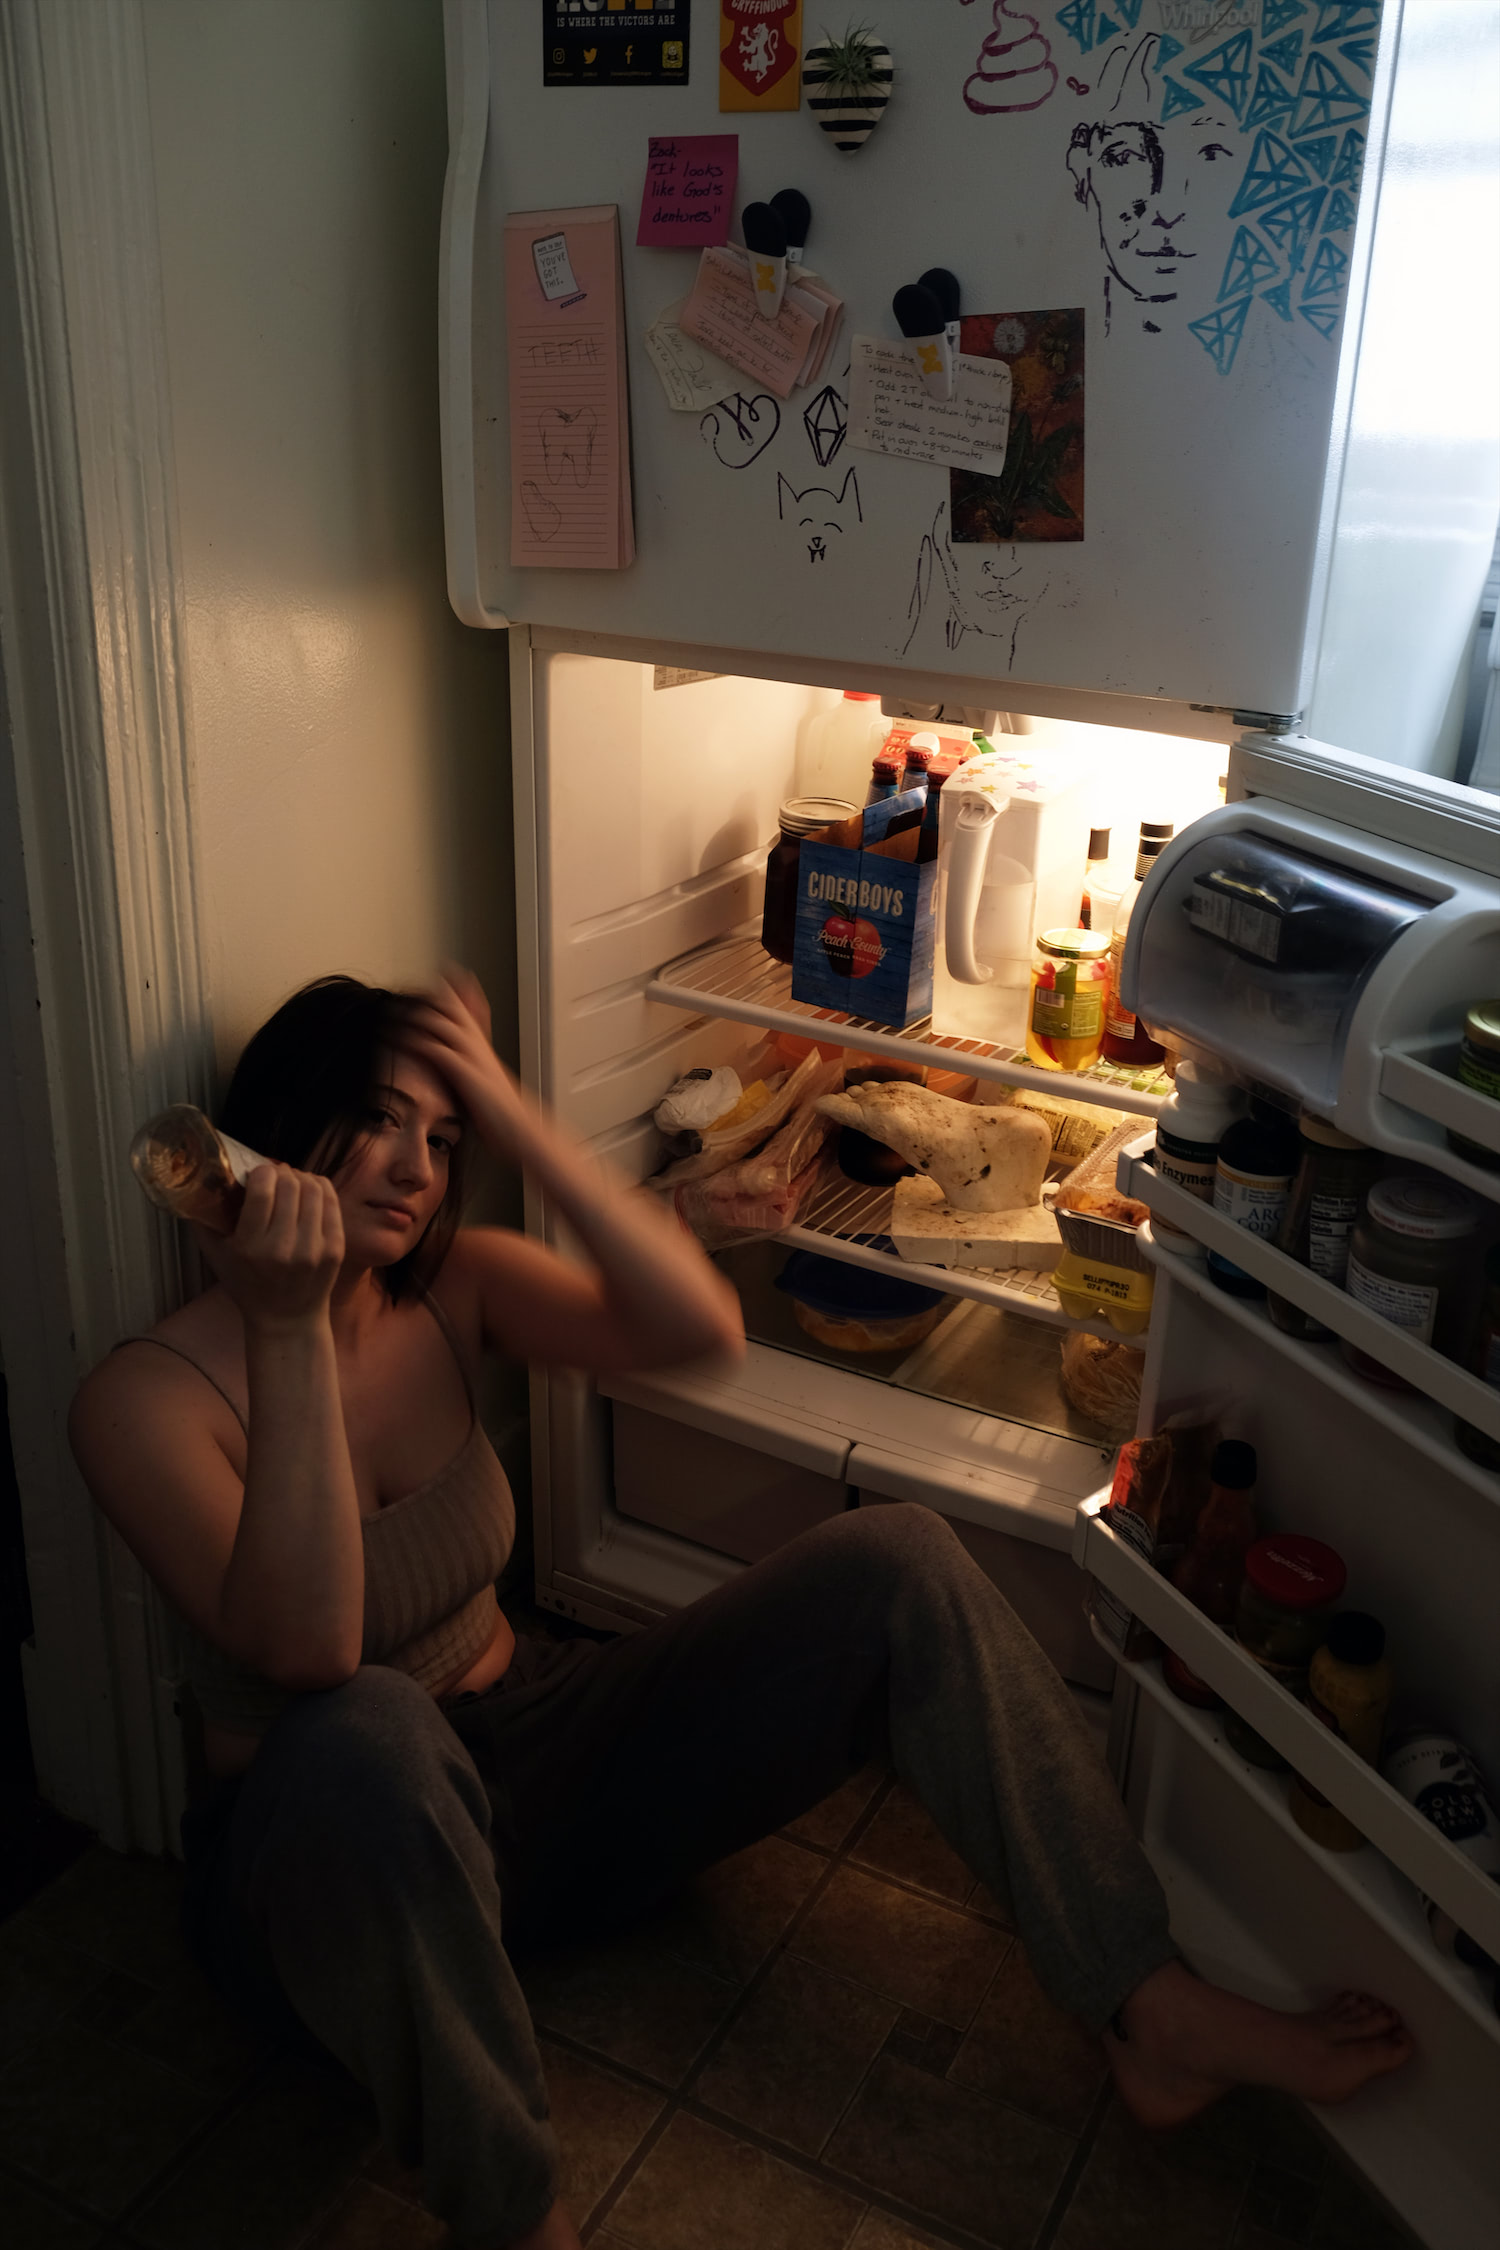 A woman eating ketchup in front of a fridge, in front of a plaster foot covered in bacteria sitting on a fridge shelf.